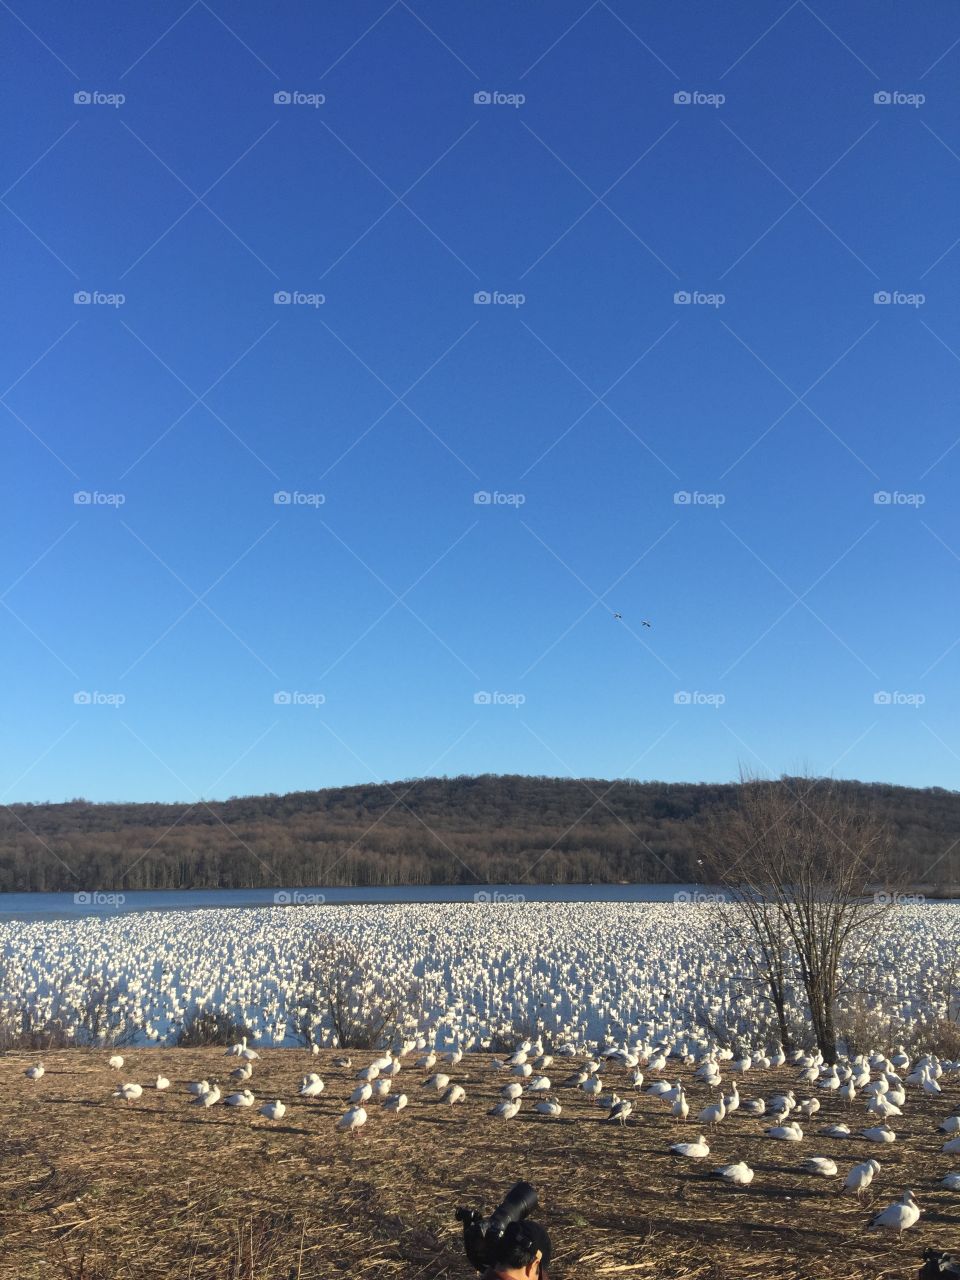 So many snow geese covering the lake looks like snow has fallen